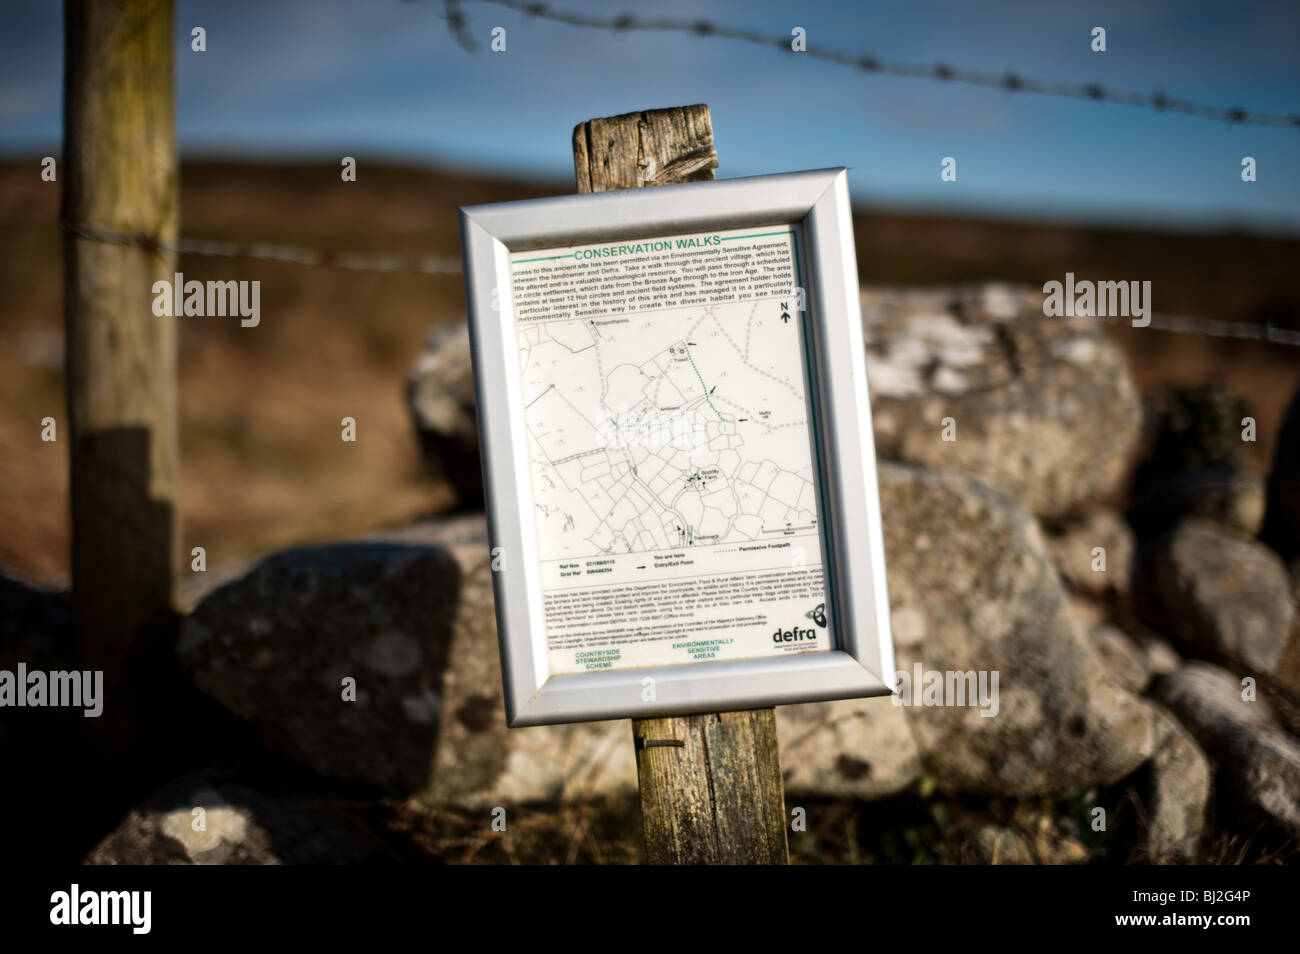 Defra sign in the Cornish countryside giving information about conservation walks Stock Photo